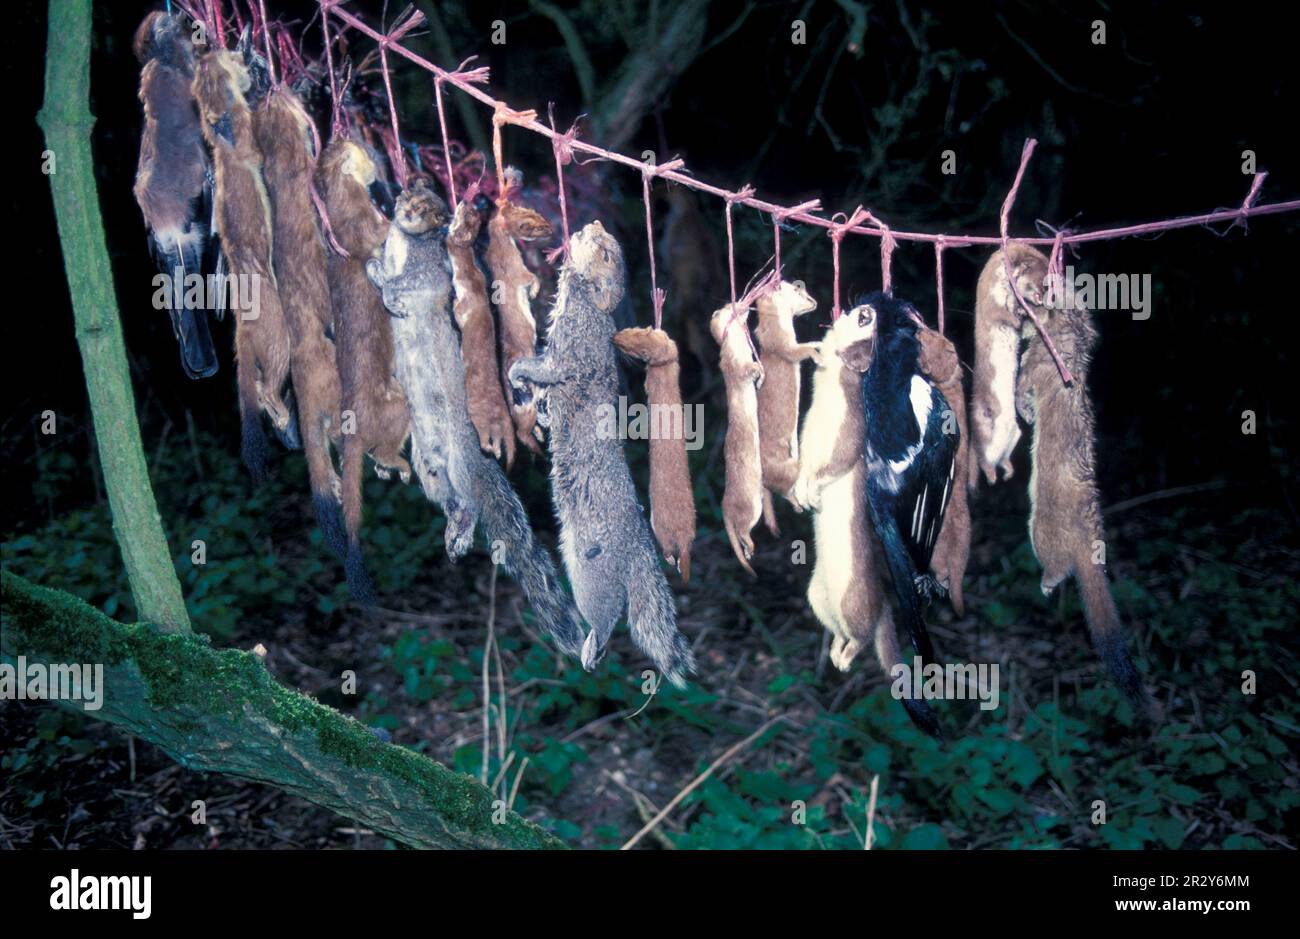 Dead stoats, weasels and squirrels on a leash Stock Photo